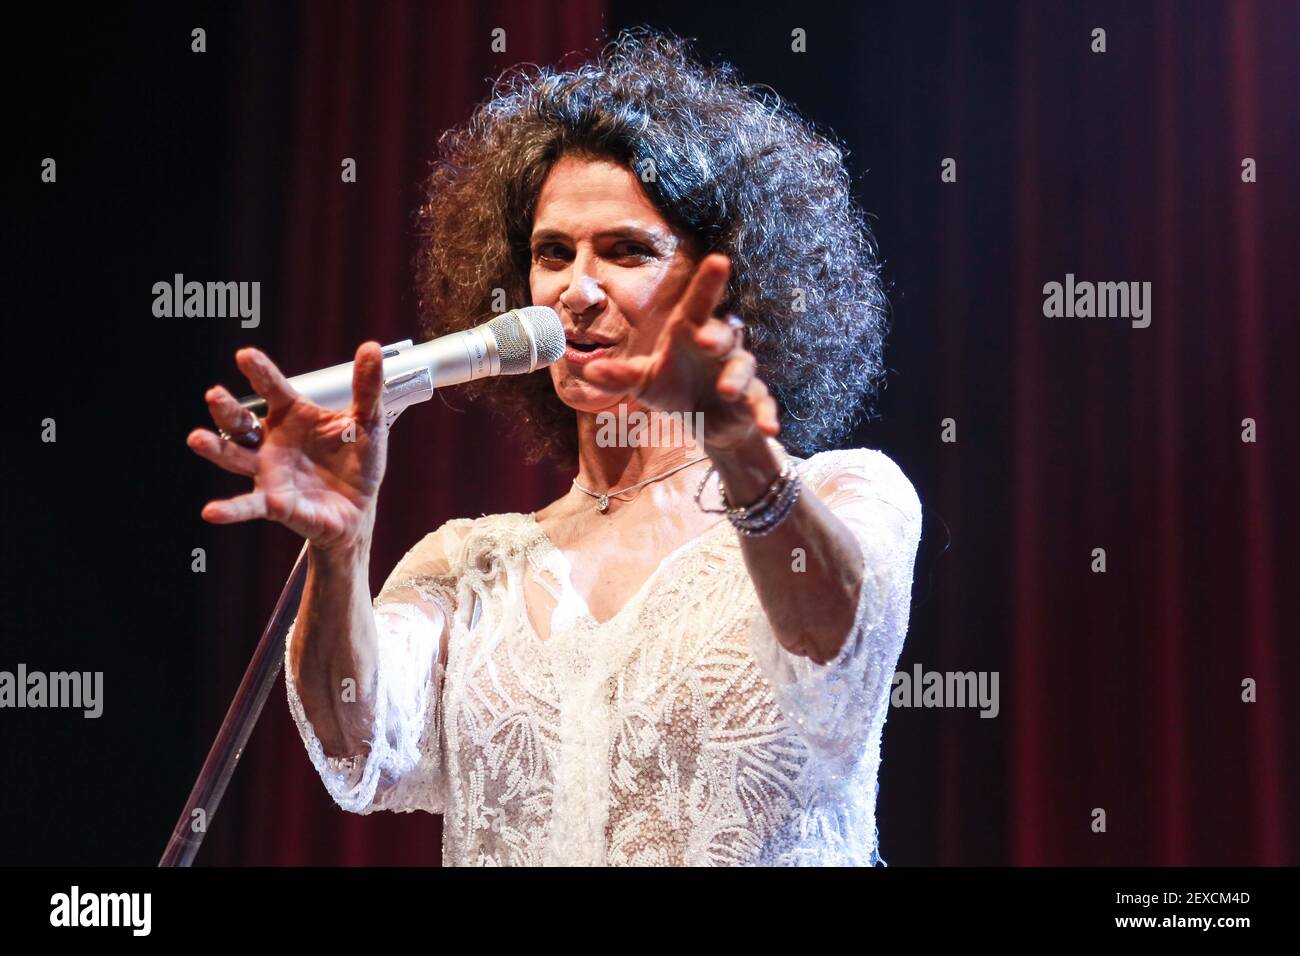 The singer Simone for presentation at Tom Brazil in the southern region of SÃ£o Paulo last night. Simone Bittencourt de Oliveira, better known as Simone, is a Brazilian singer and a major performer of MÃºsica popular brasileira (MPB) who has recorded more than 31 albums. (Photo by William Volcov / Brazil Photo Press / Pacific Press) *** Please Use Credit from Credit Field *** Stock Photo